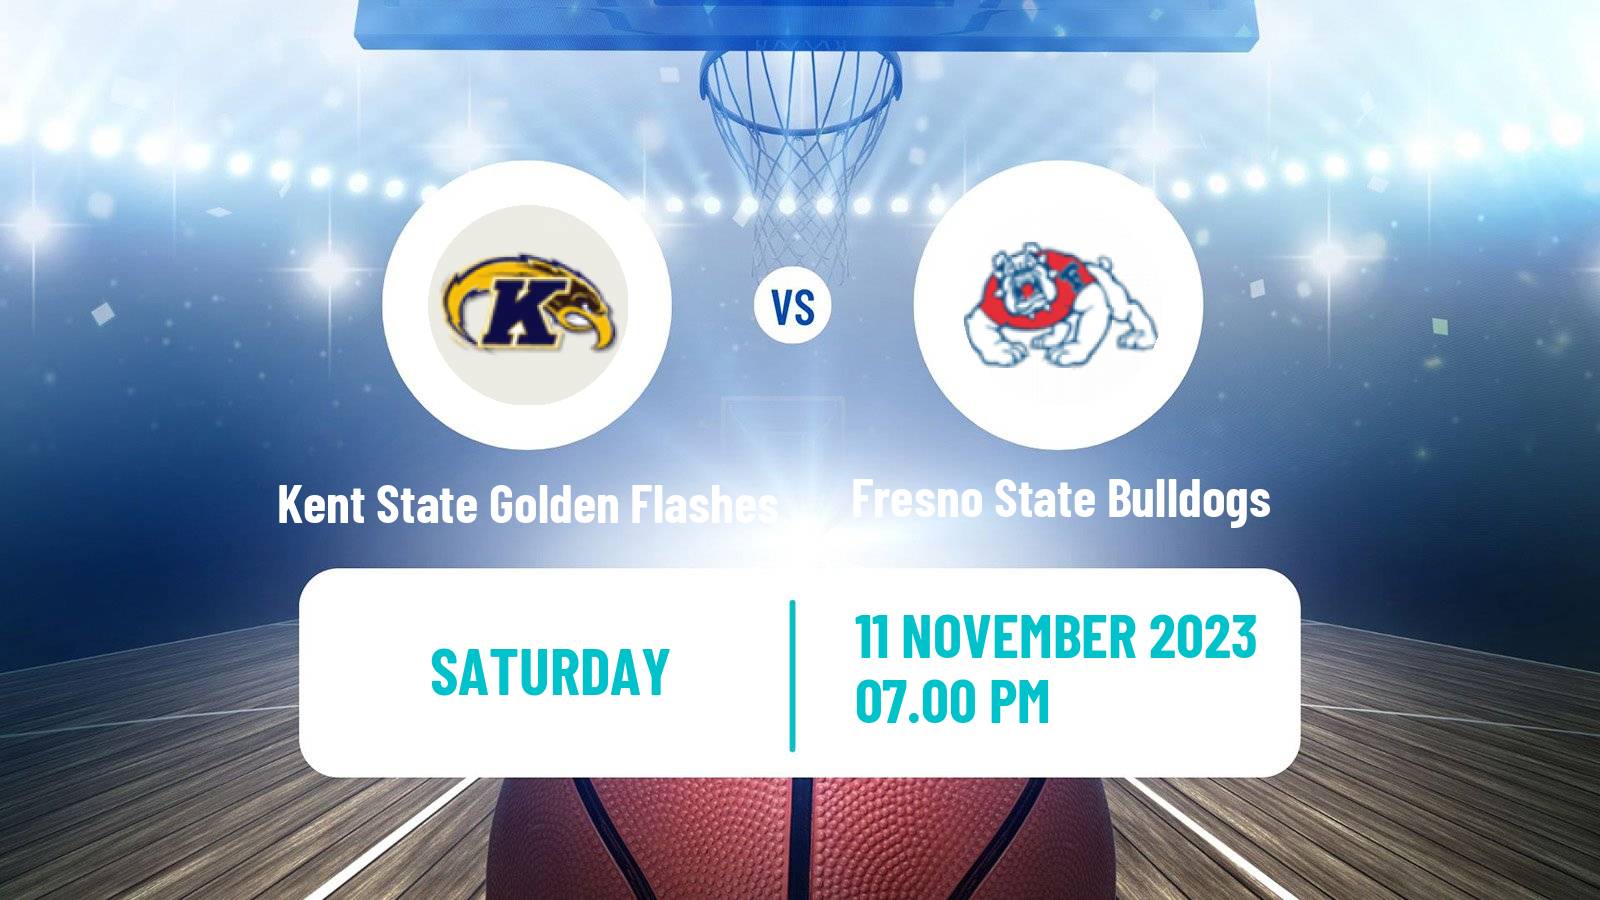 Basketball NCAA College Basketball Kent State Golden Flashes - Fresno State Bulldogs